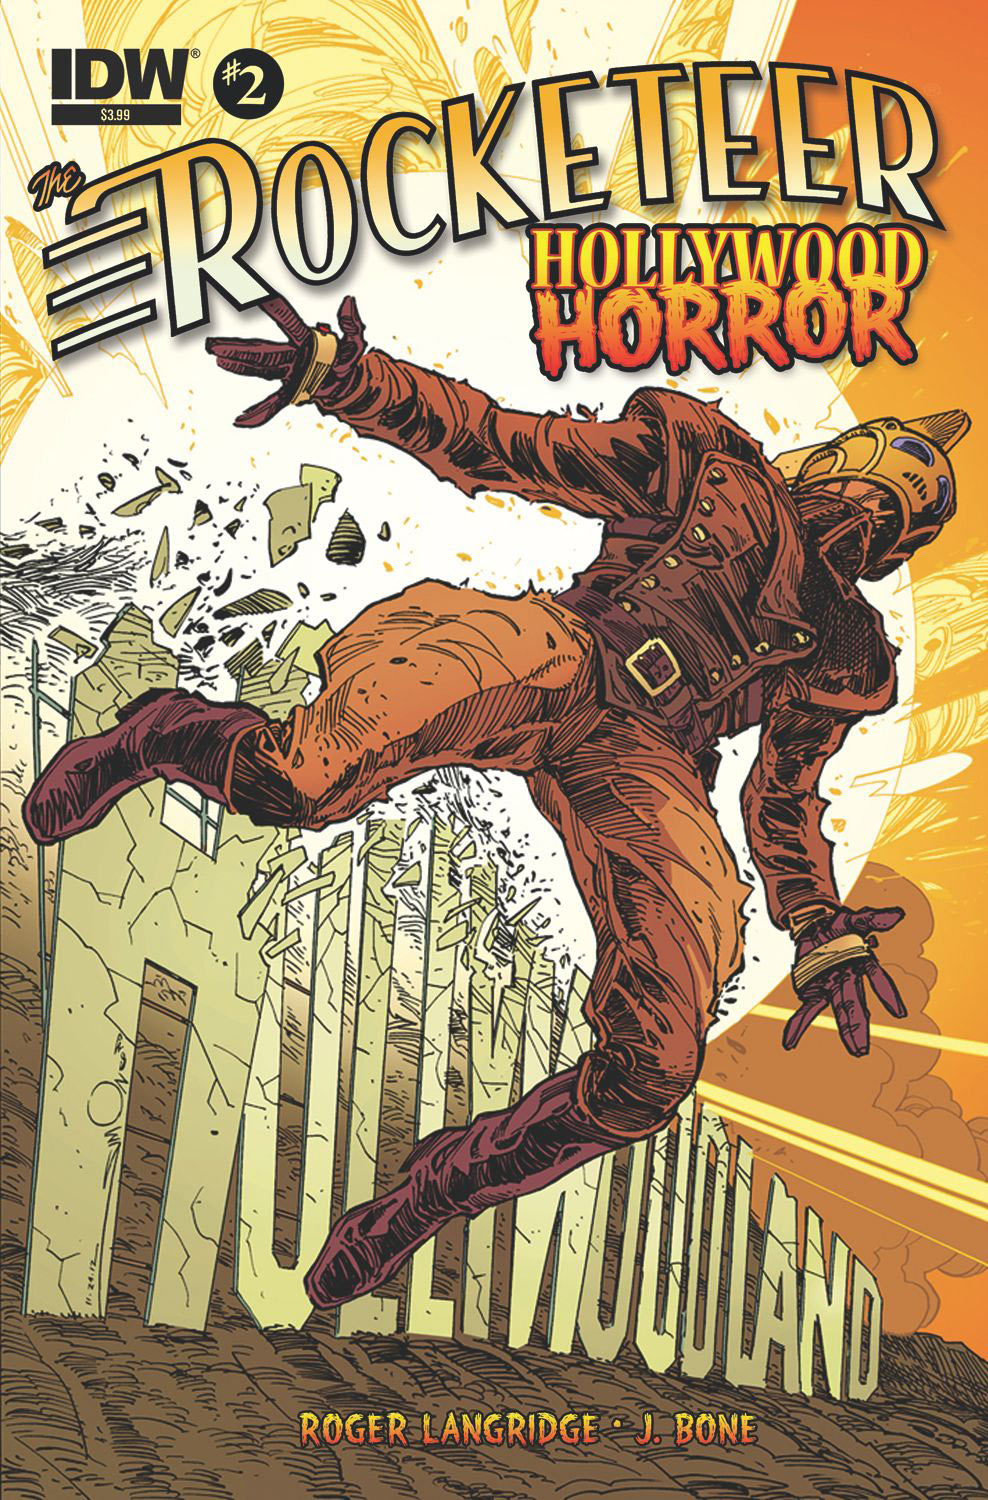 The Rocketeer: Hollywood Horror #2 (of 4)